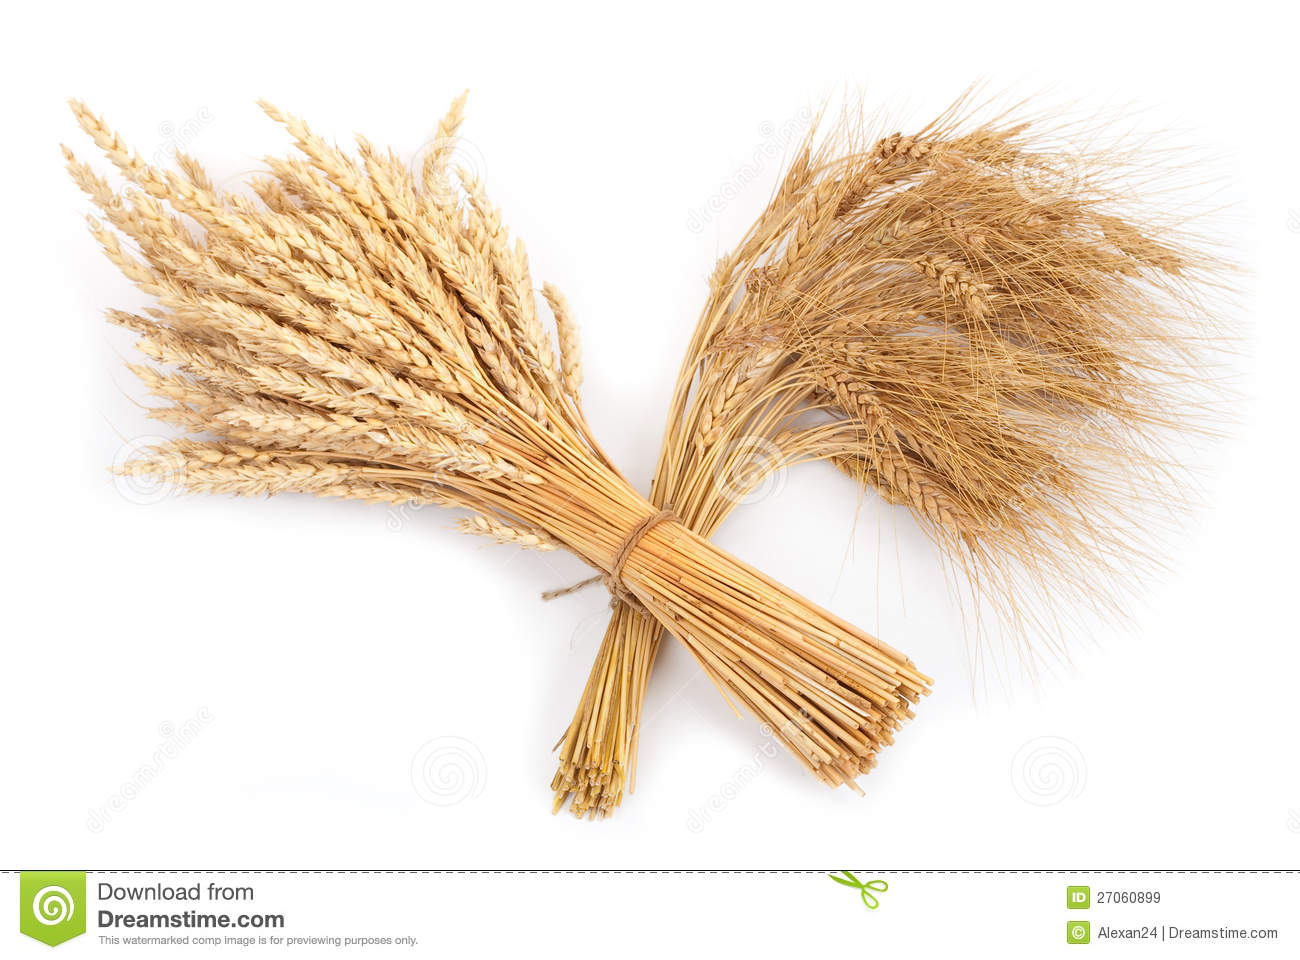 Sheaf Of Wheat And Rye Royalty Free Stock Images   Image  27060899